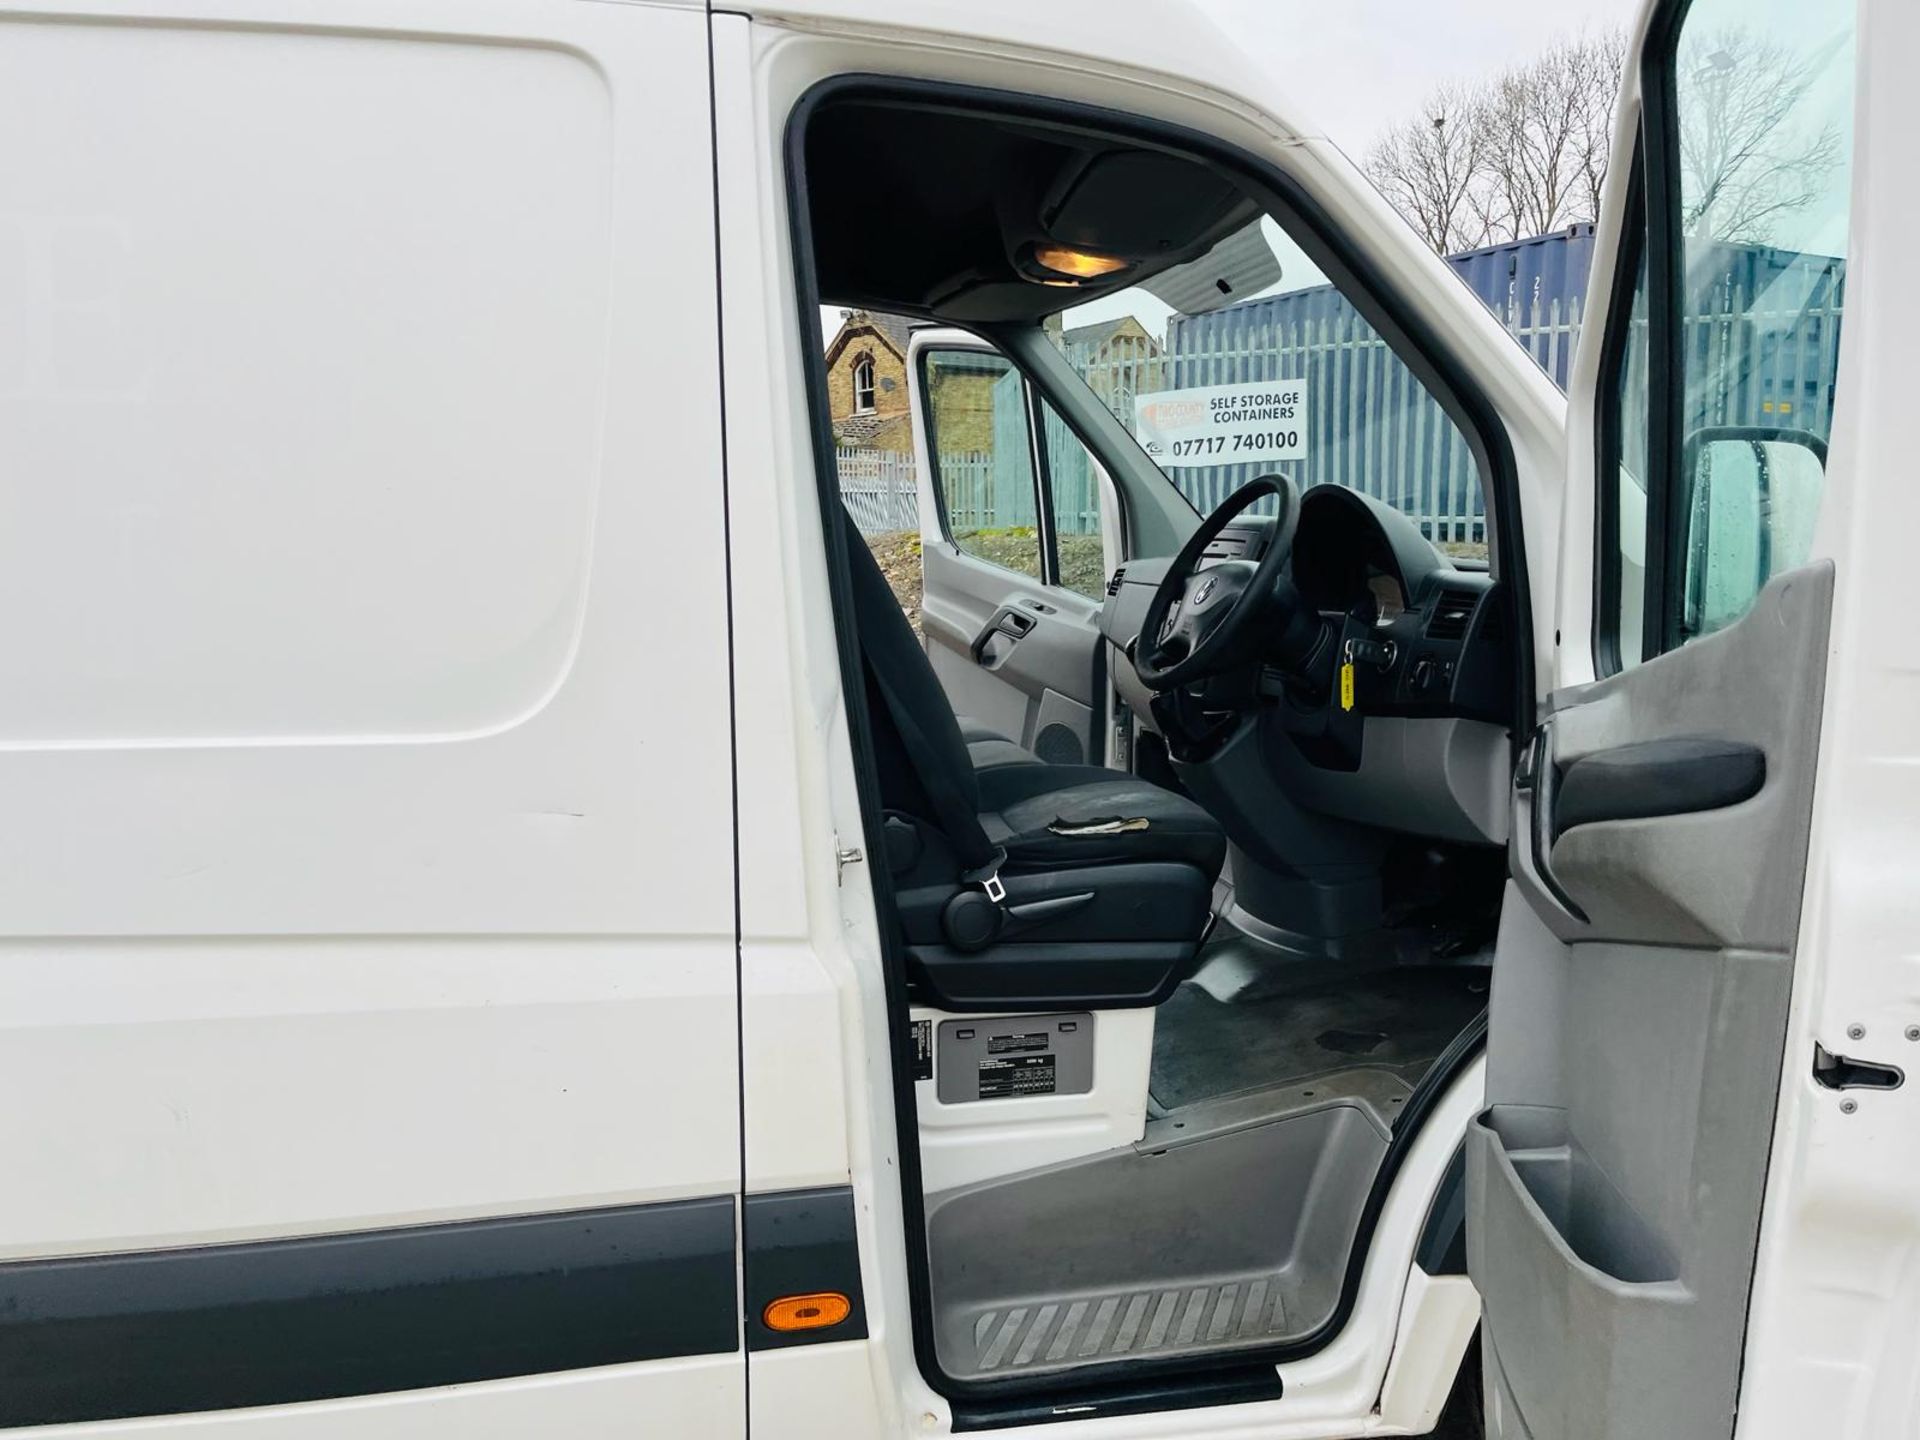 ** ON SALE ** Volkswagen Crafter Cr35 TDI 109 2016 '66 Reg' Refrigerated -ULEZ Compliant - Bluetooth - Image 16 of 30